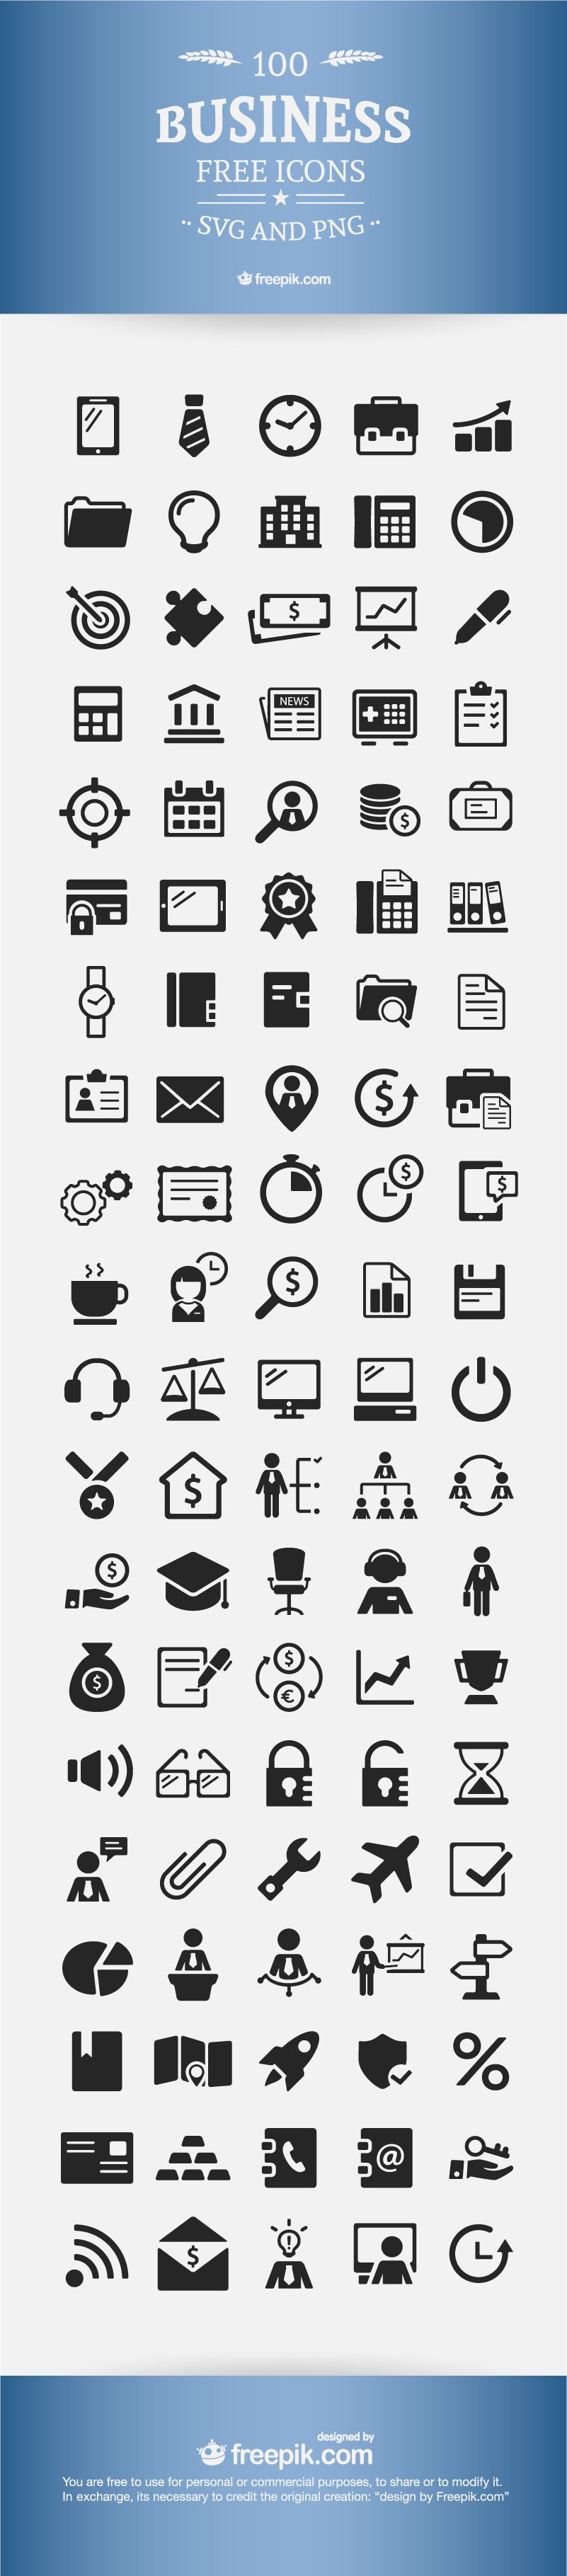 download free business icons 100 vectors free stuff